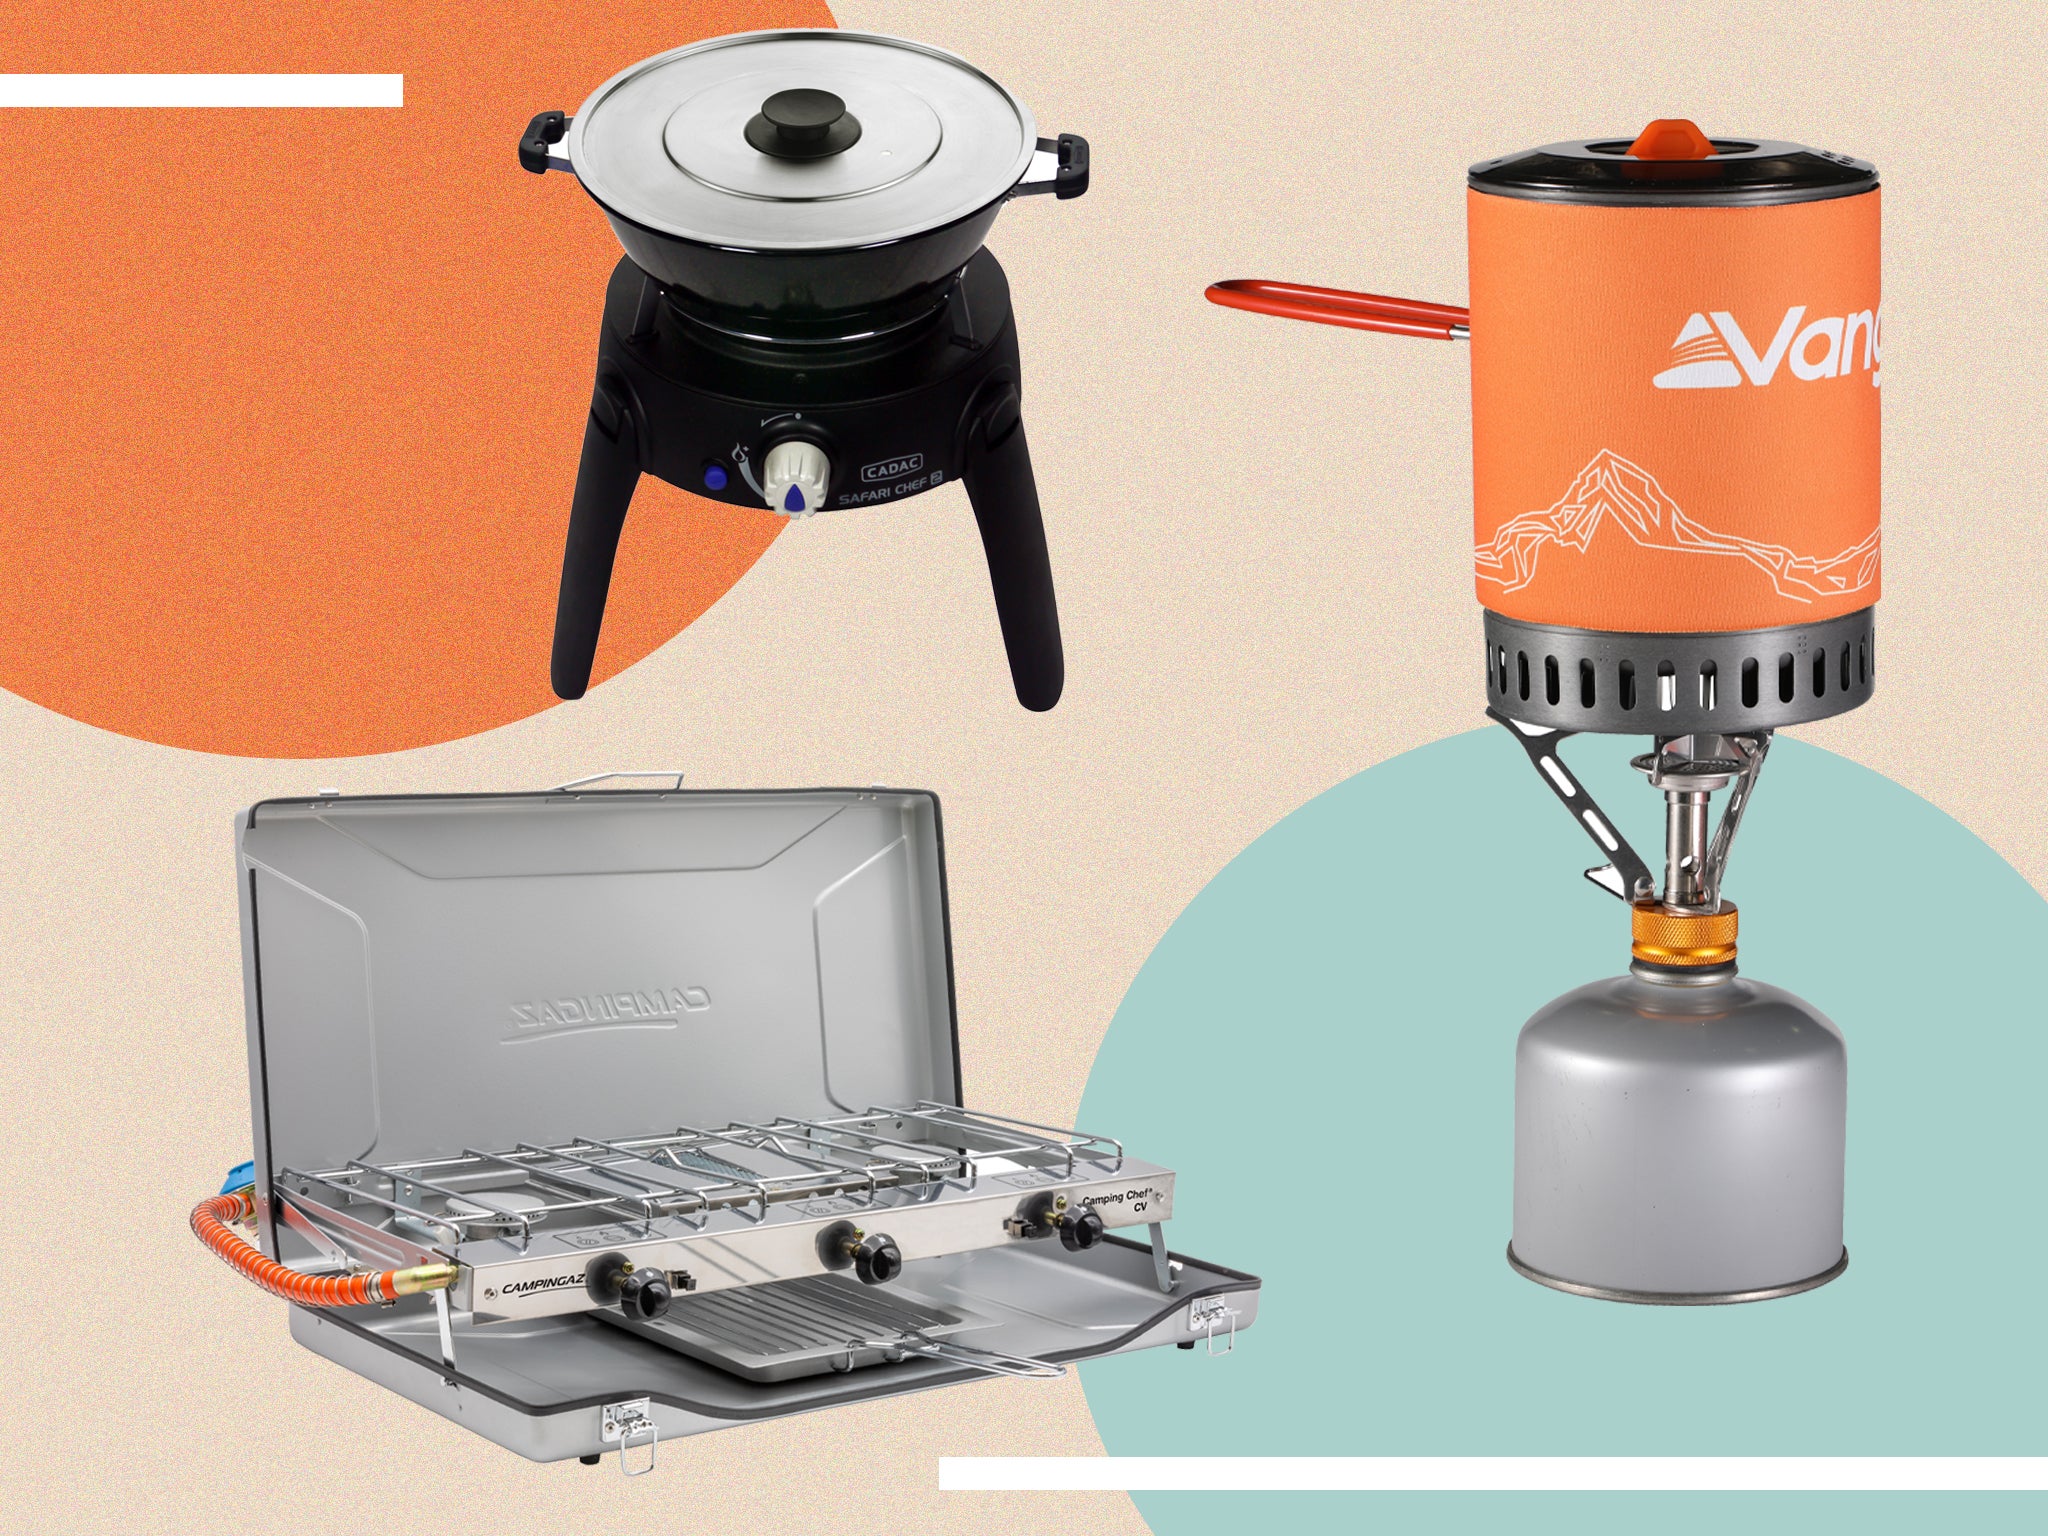 Best camping stoves 2022: Portable, lightweight wood and gas